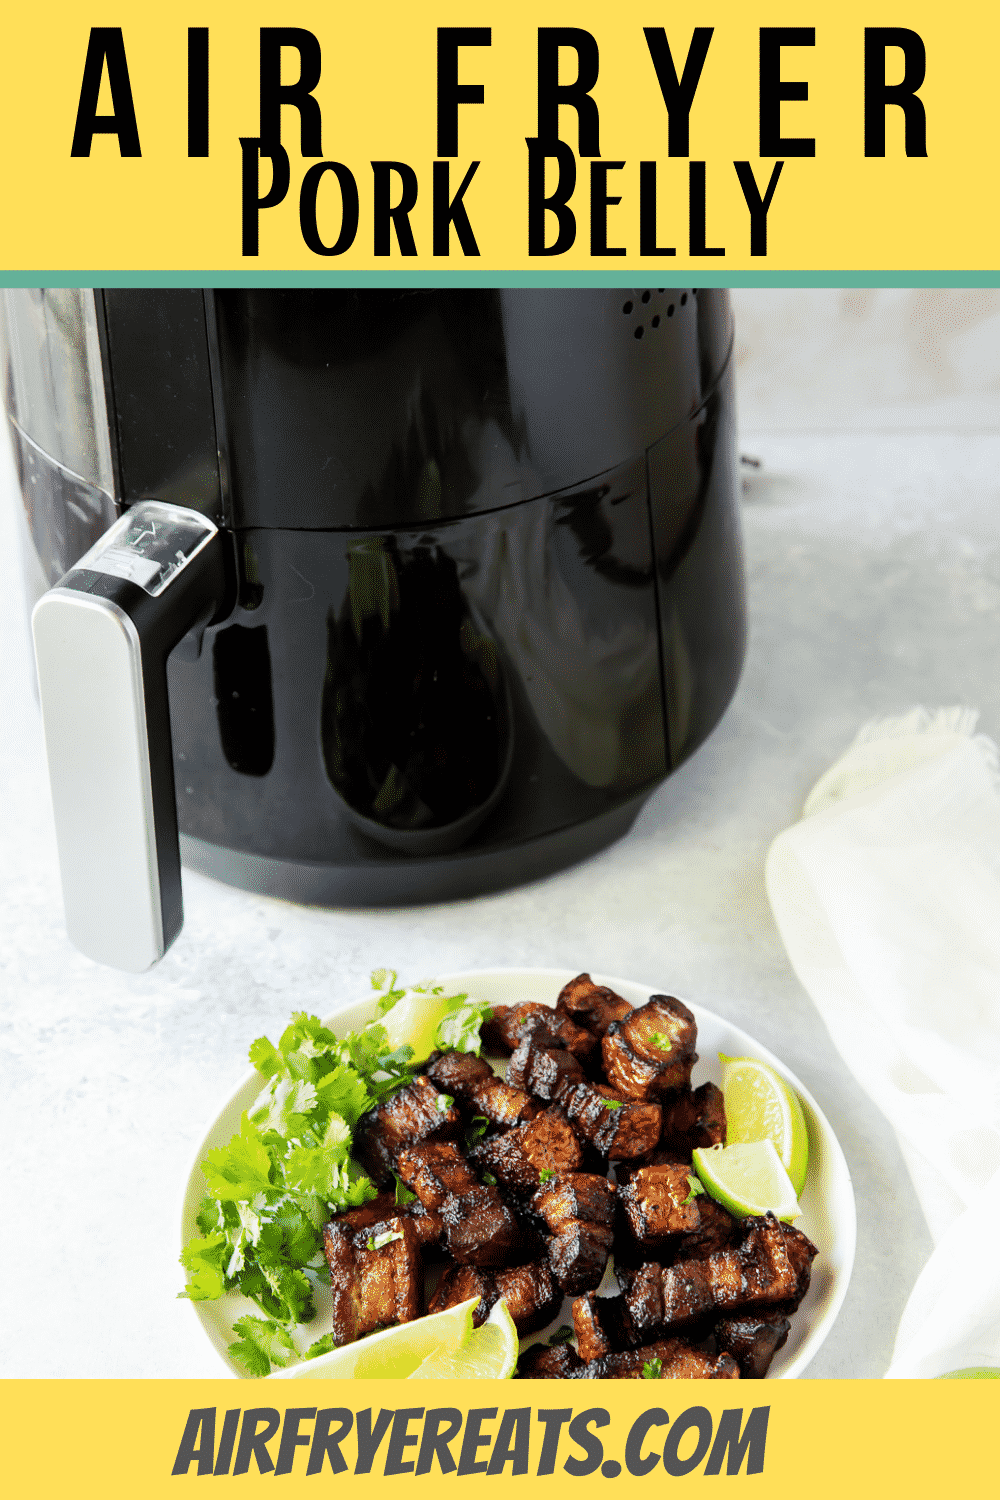 These little bites of Air Fryer Pork Belly are crispy, salty, and absolutely delicious. They will melt in your mouth with amazing flavor and texture. #pork #airfryer #porkbelly via @vegetarianmamma